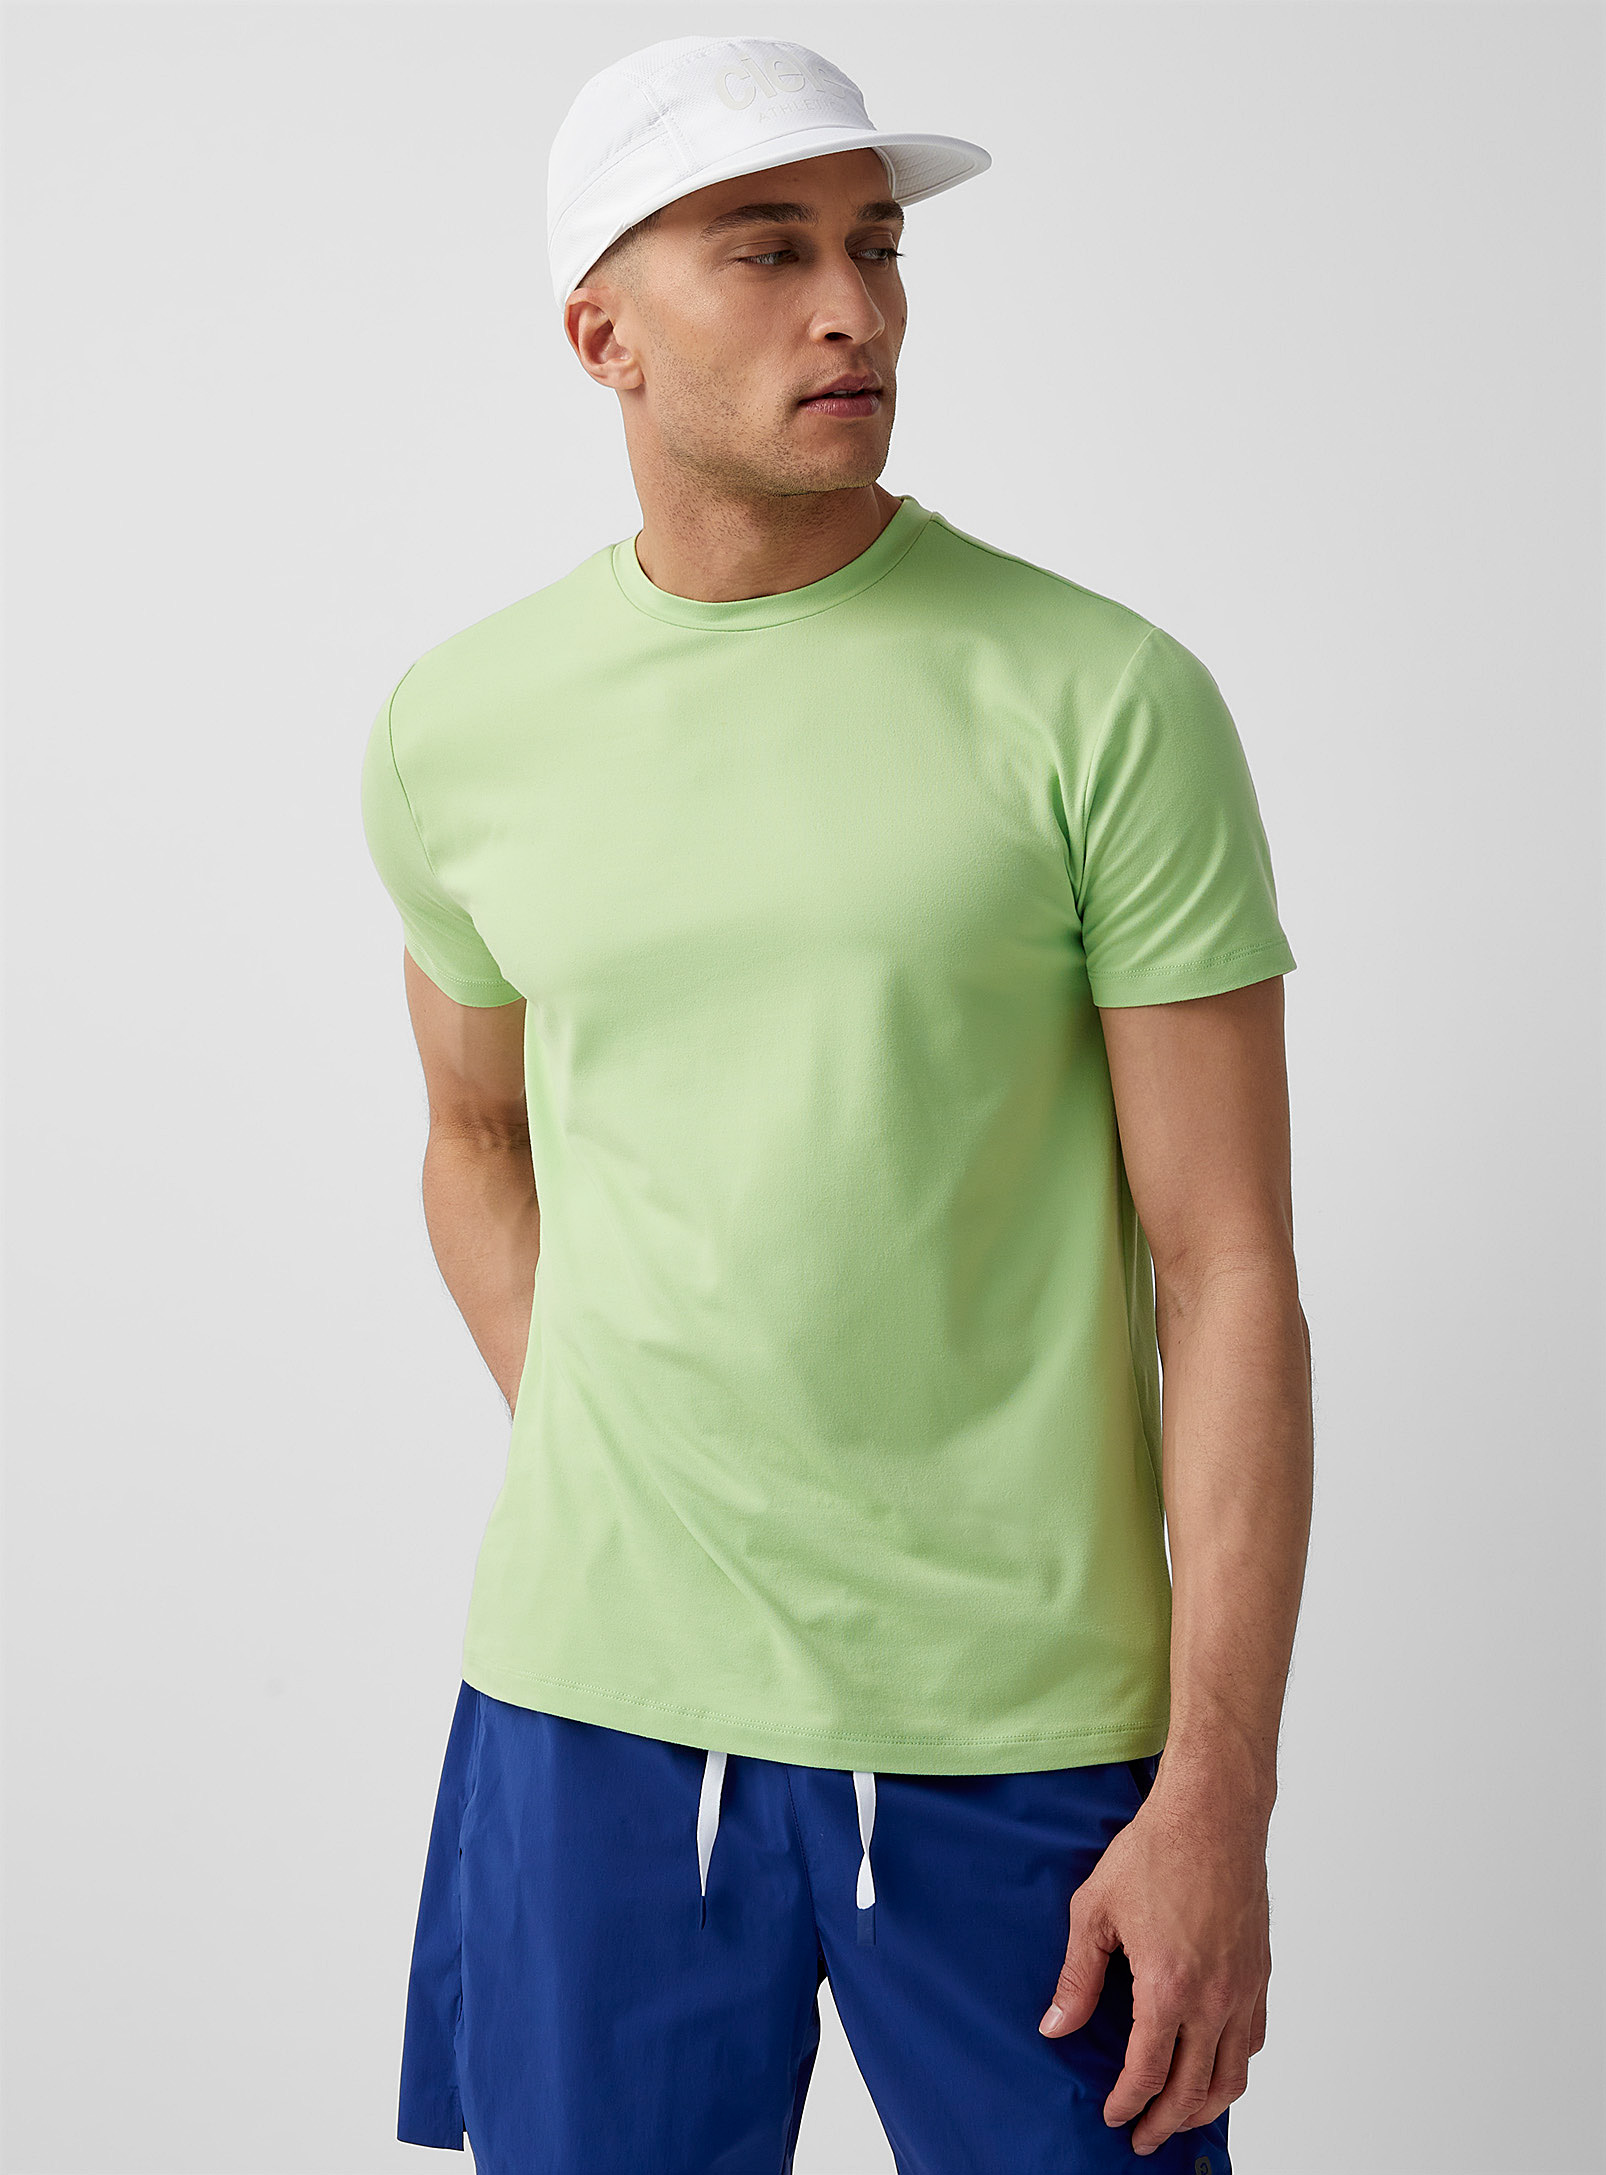 I.fiv5 Ultra-soft Active T-shirt In Lime Green